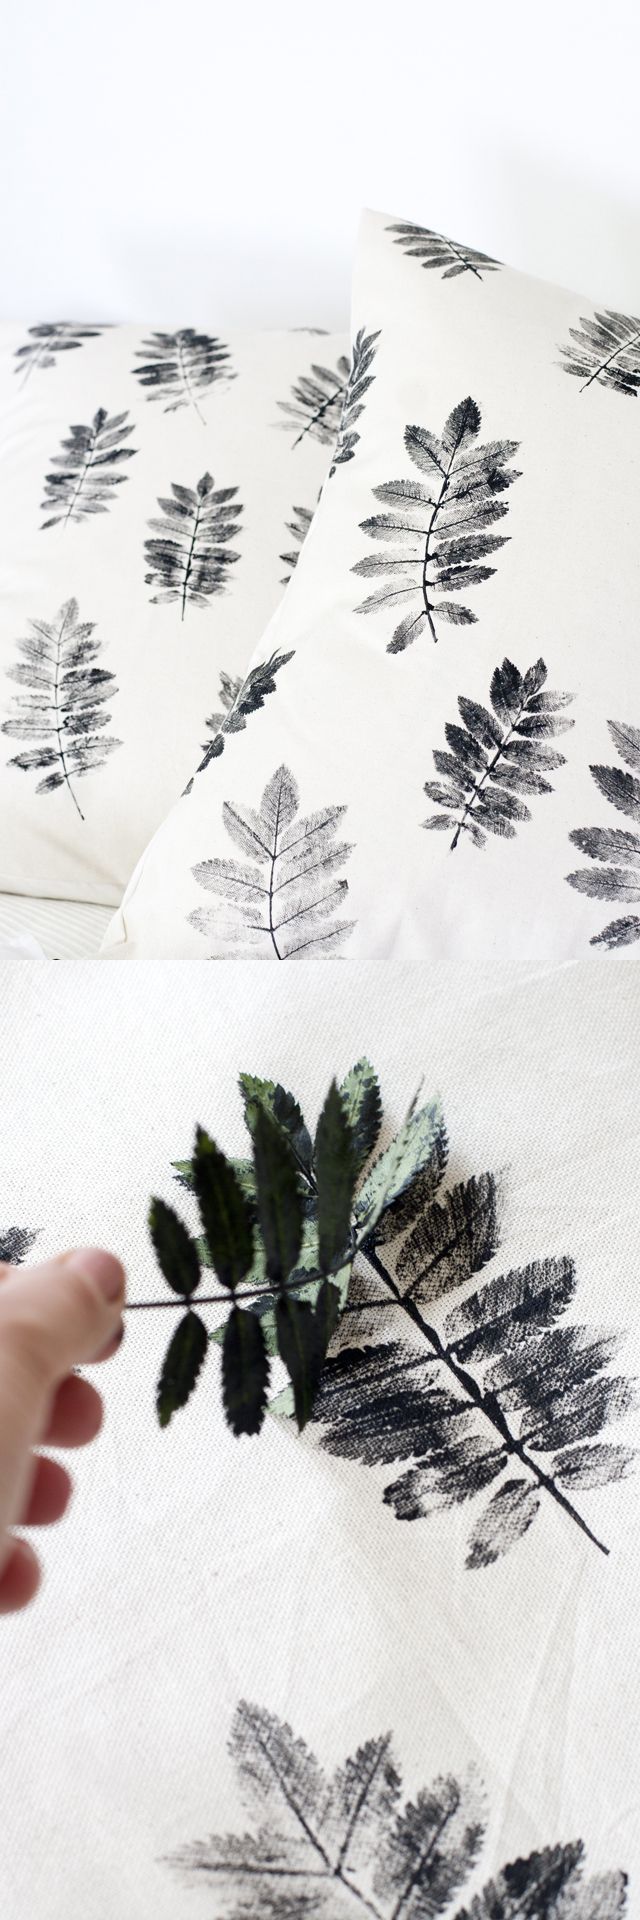 Pillow | stamps | DIY | crafts idea | hello fall | weekend project